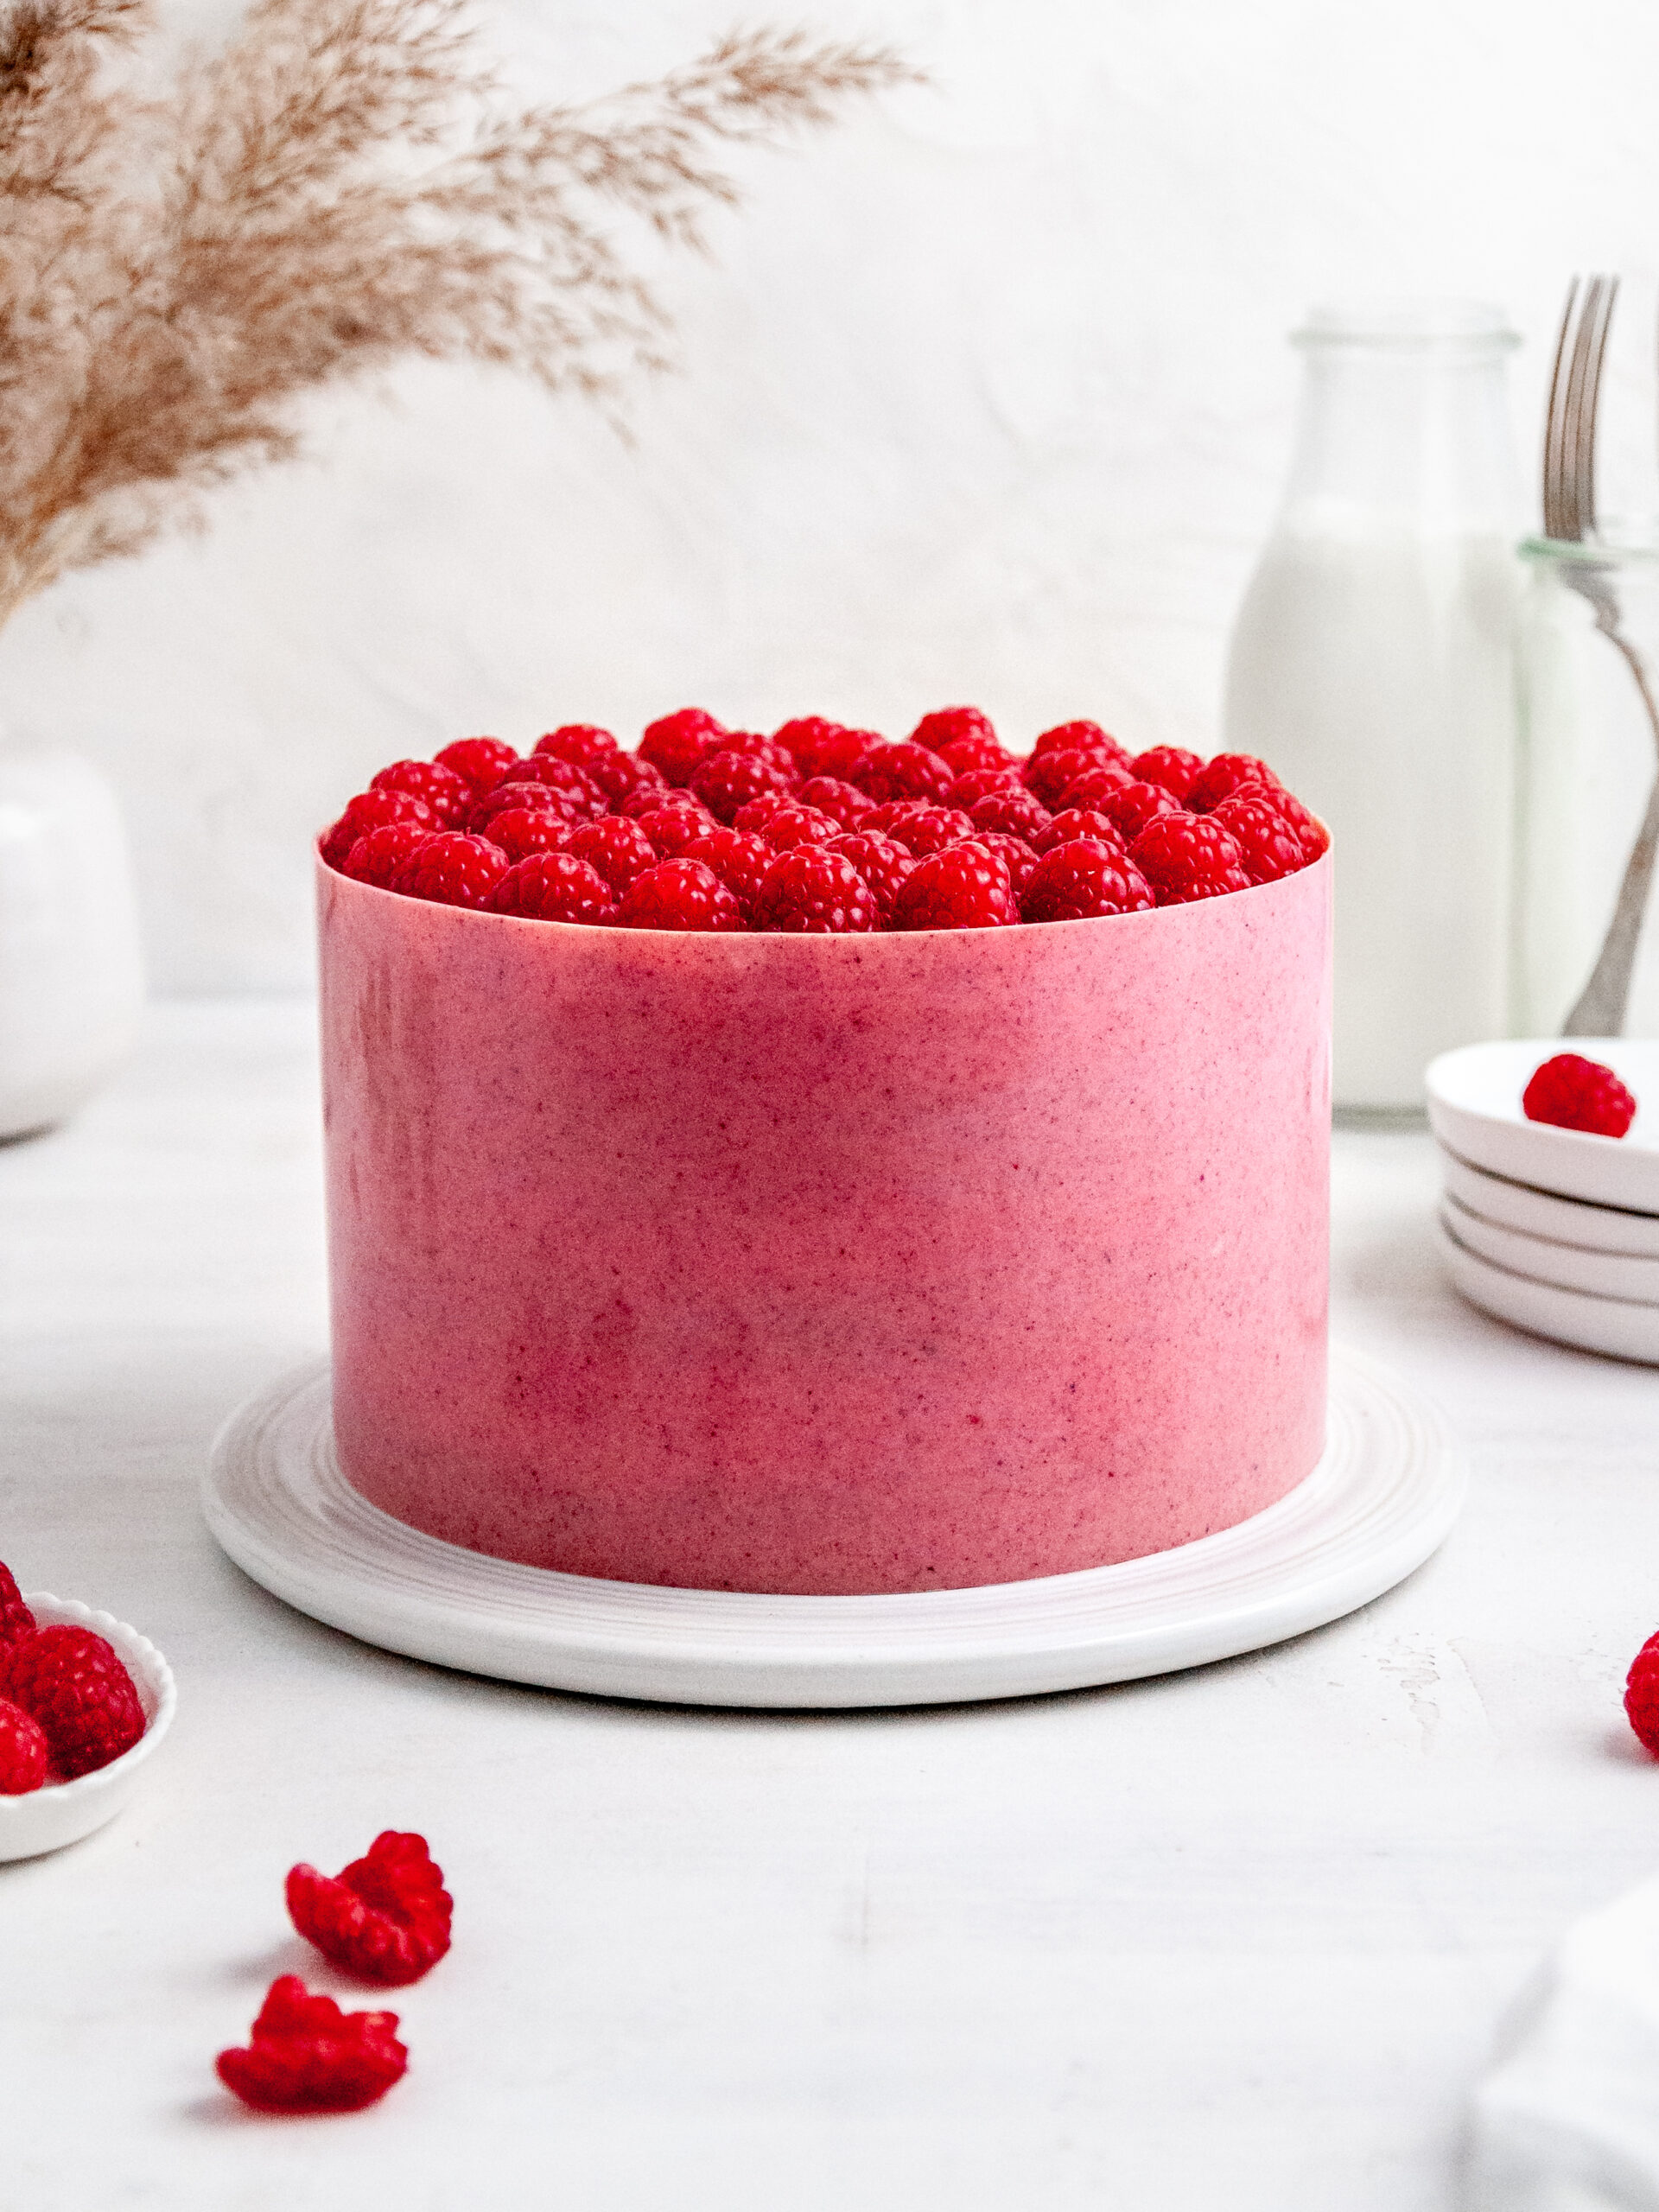 raspberry and rhubarb mousse layer cake on a cake stand.